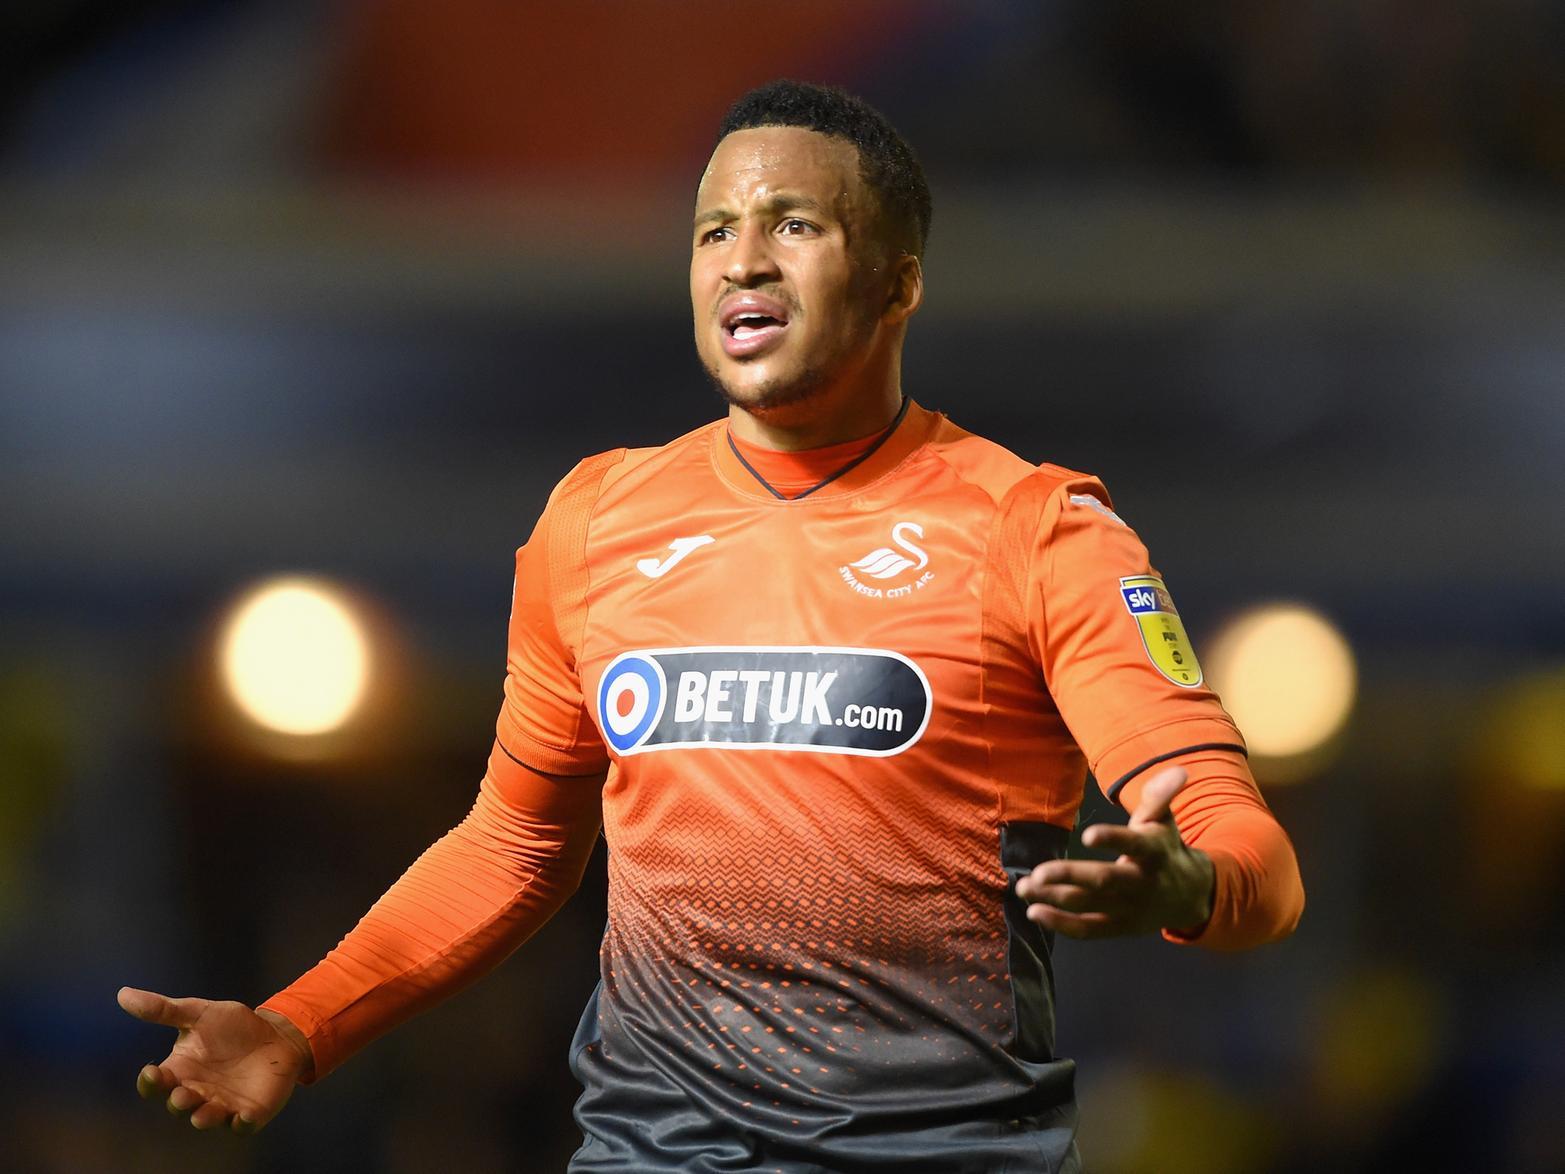 West Bromwich Albion are understood to be closing in on a deal to sign ex-Swansea City defenderMartin Olsson, who has 45 caps for the Swedennational side. (Sport Witness)